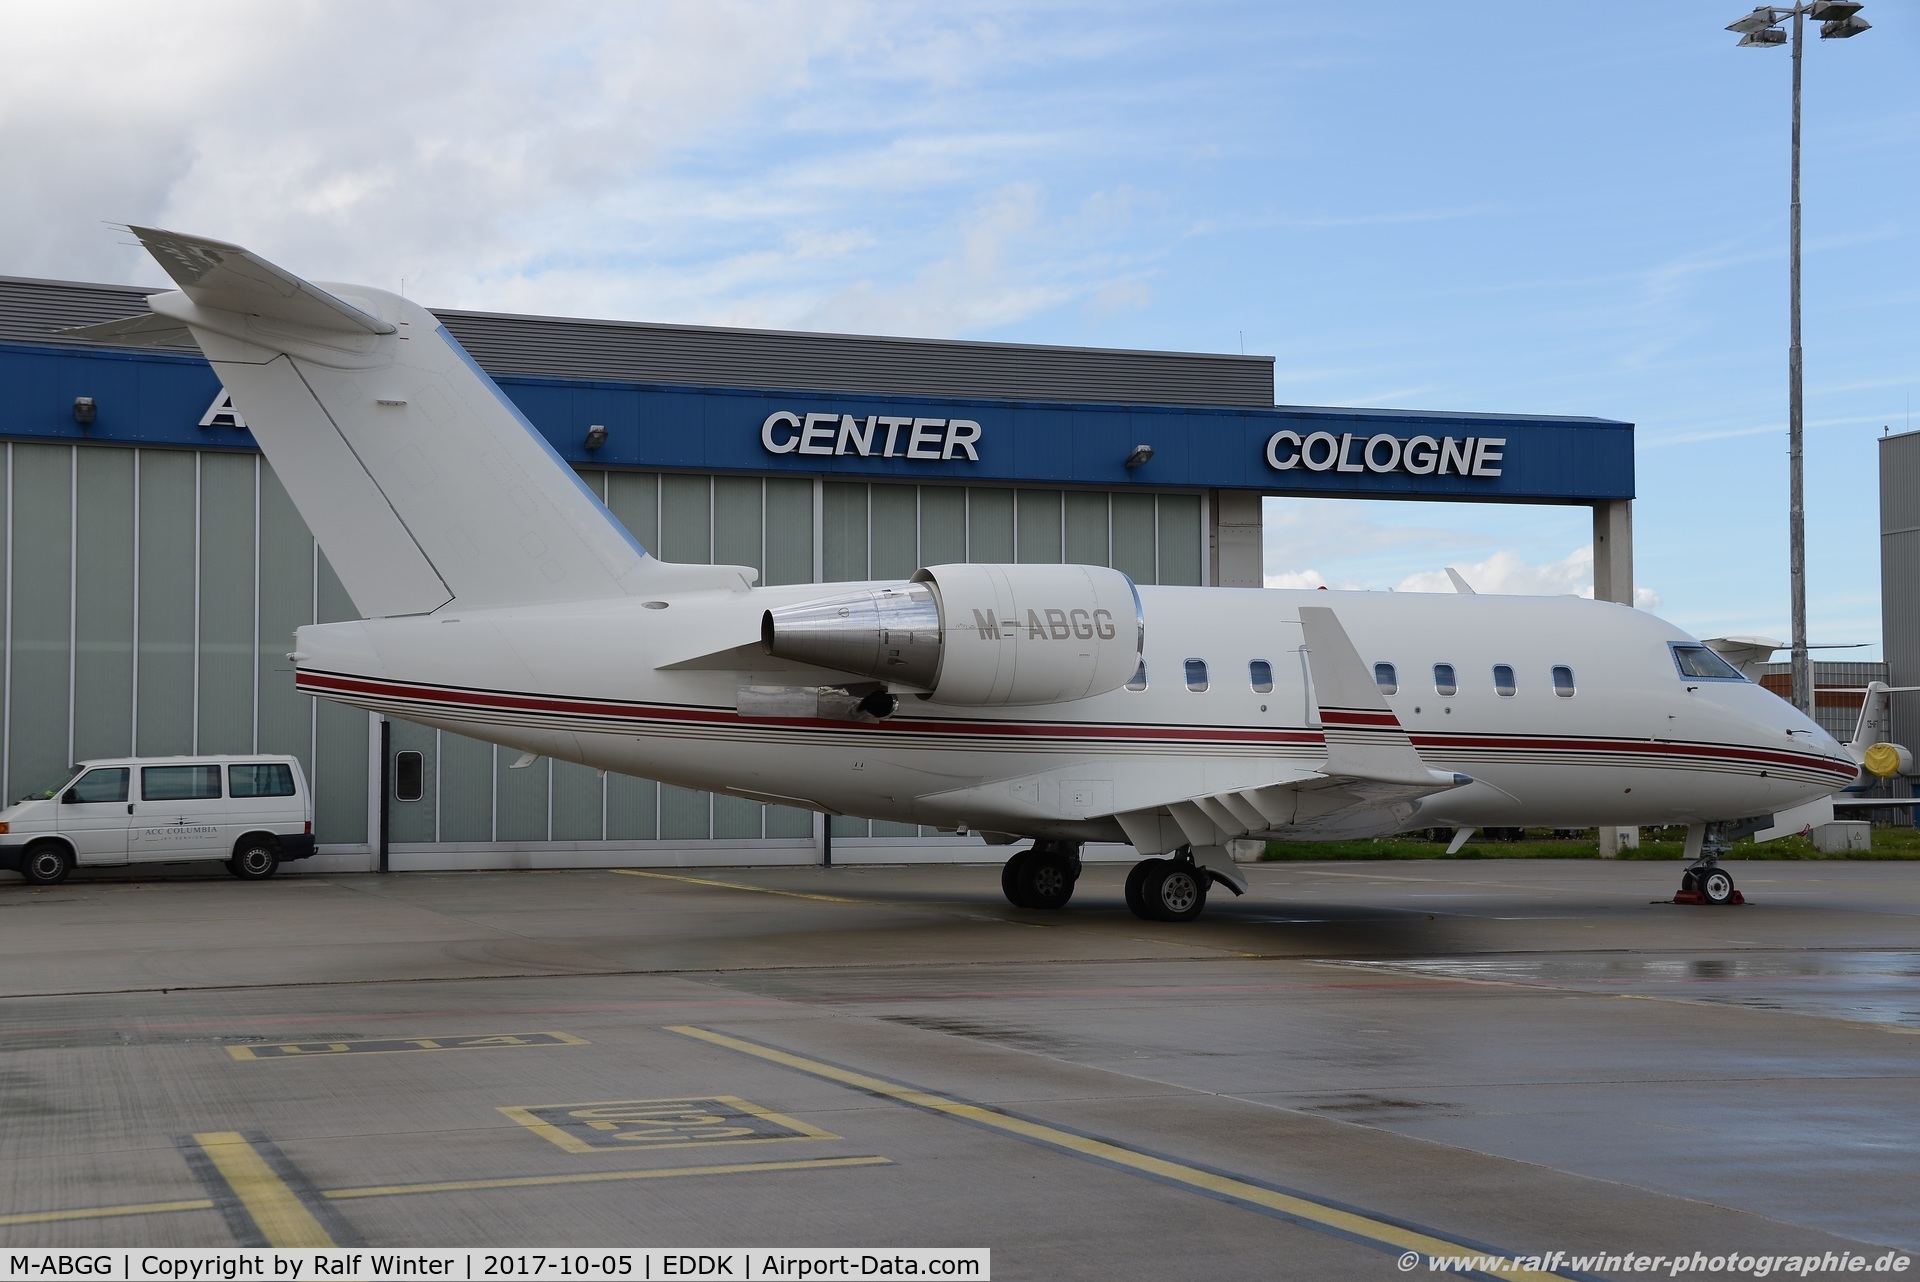 M-ABGG, 2000 Bombardier Challenger 604 (CL-600-2B16) C/N 5450, Bombardier CL-600-2B16 Challenger 604 - Zarox Holdings - 5450 - M-ABGG - 05.10.2017 - CGN